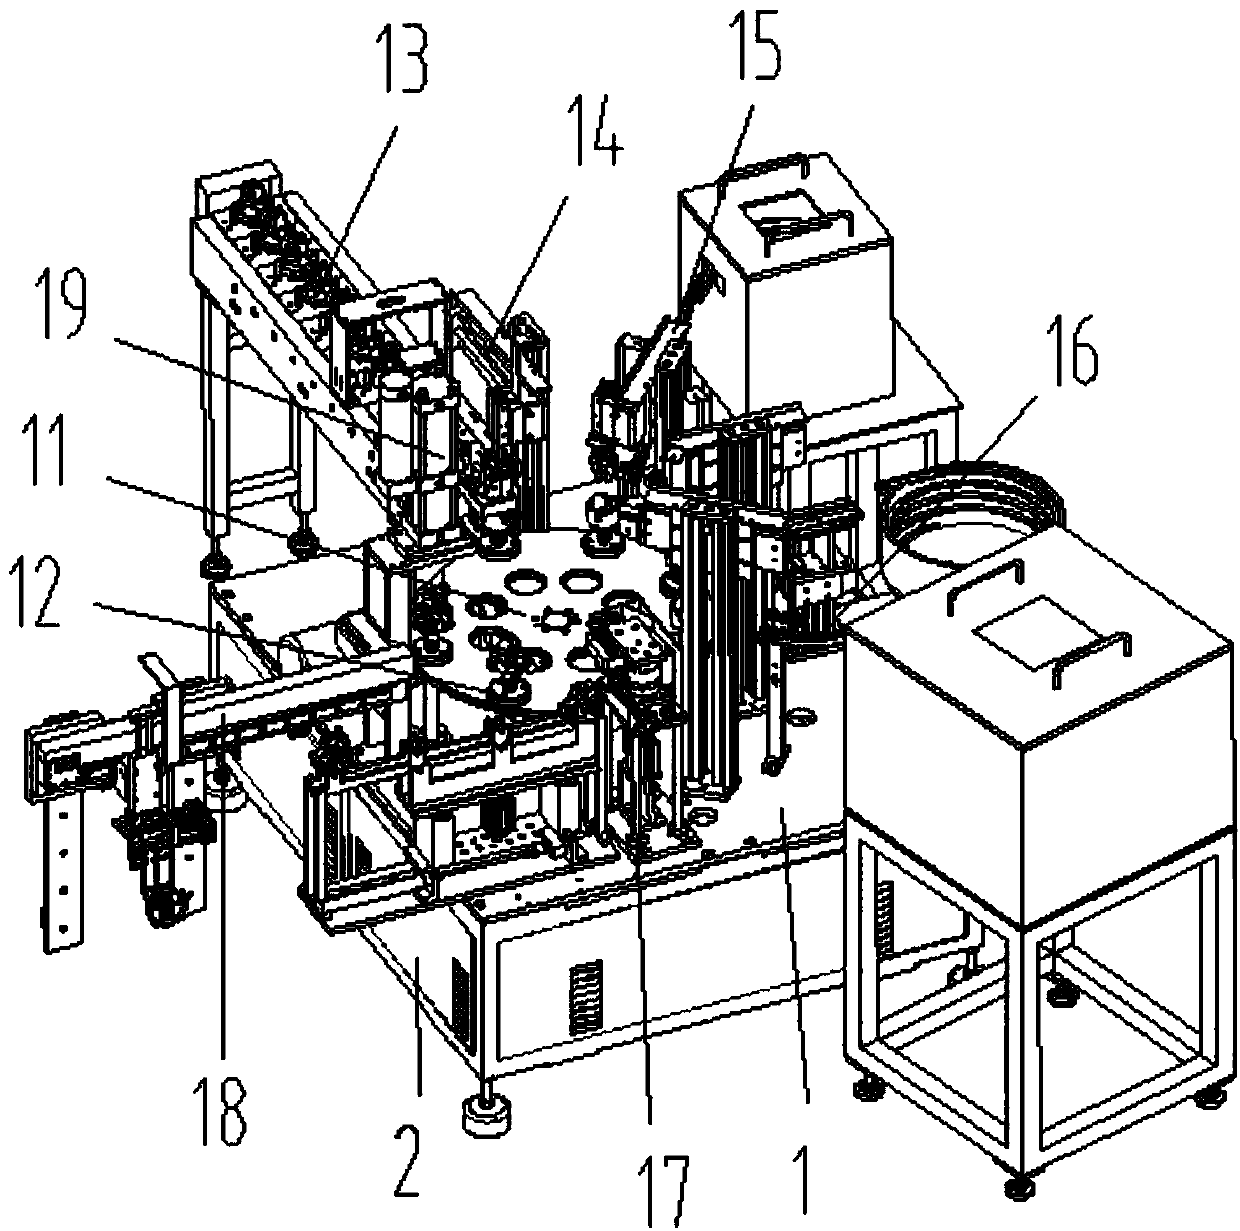 An automatic assembly mechanism for a gear oiler box